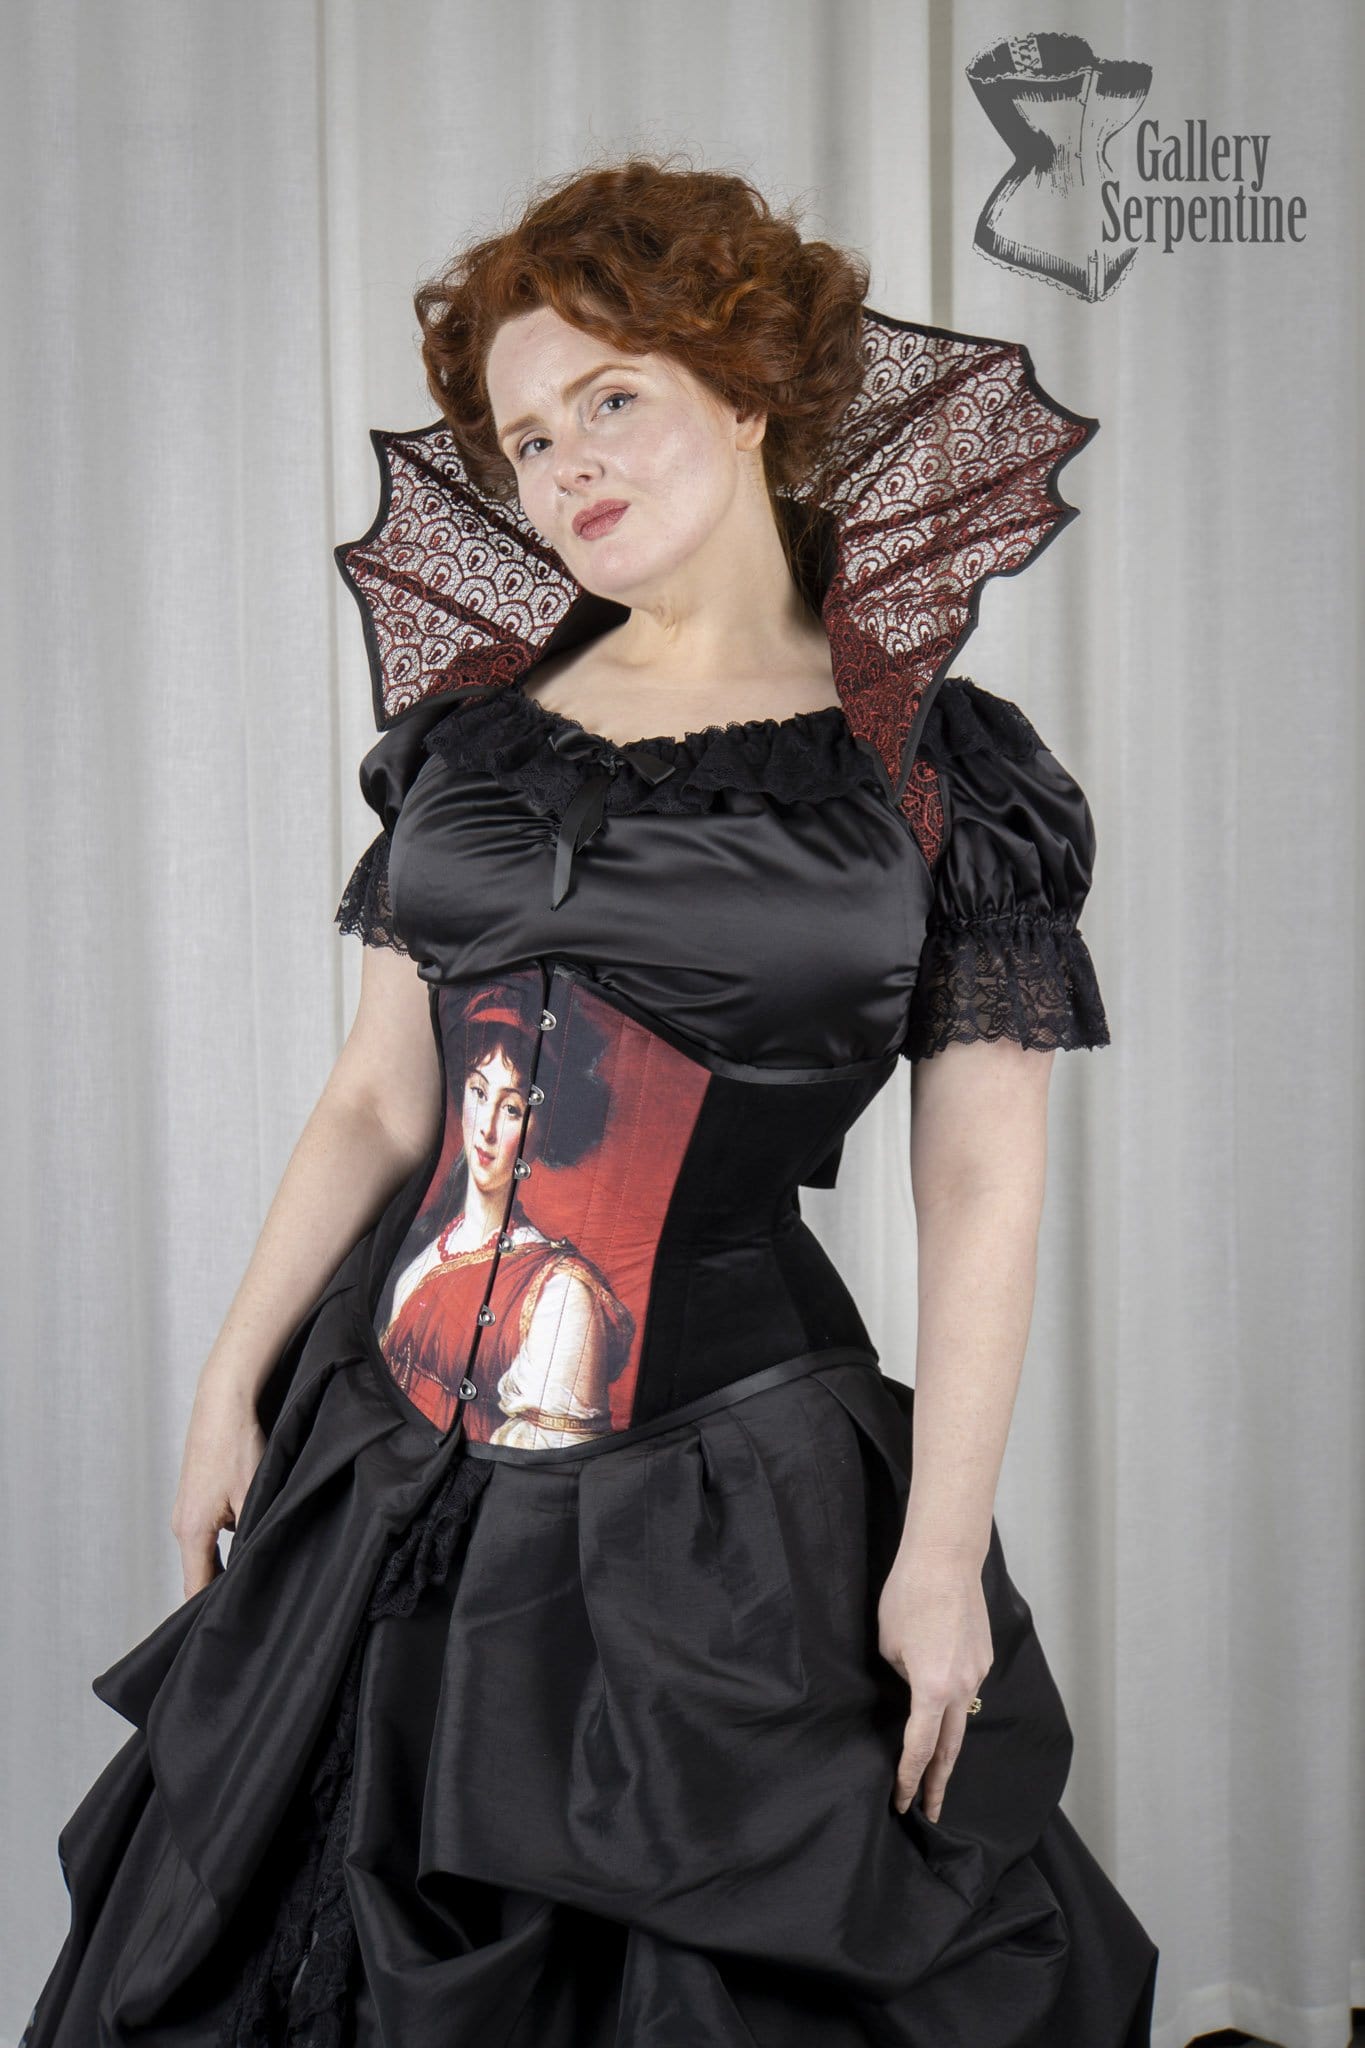 red headed pre raphaelite victorian model wearing a lace elizabethan collar and modelling the new pre raphaelite corset for Gallery Serpentine